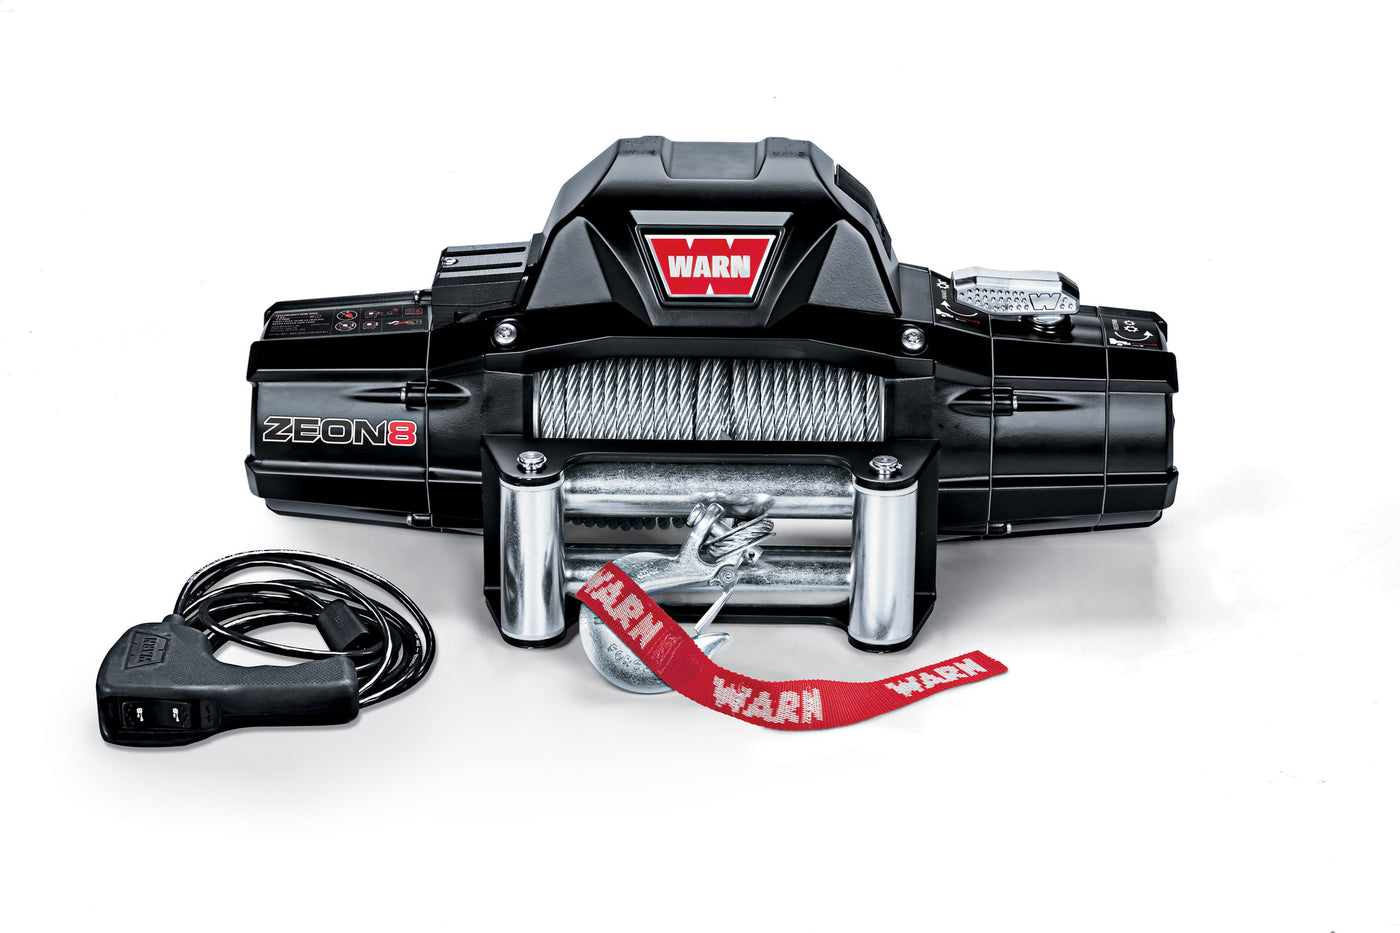 WARN ZEON 8 Winch with 100' Wire Rope and Roller Fairlead